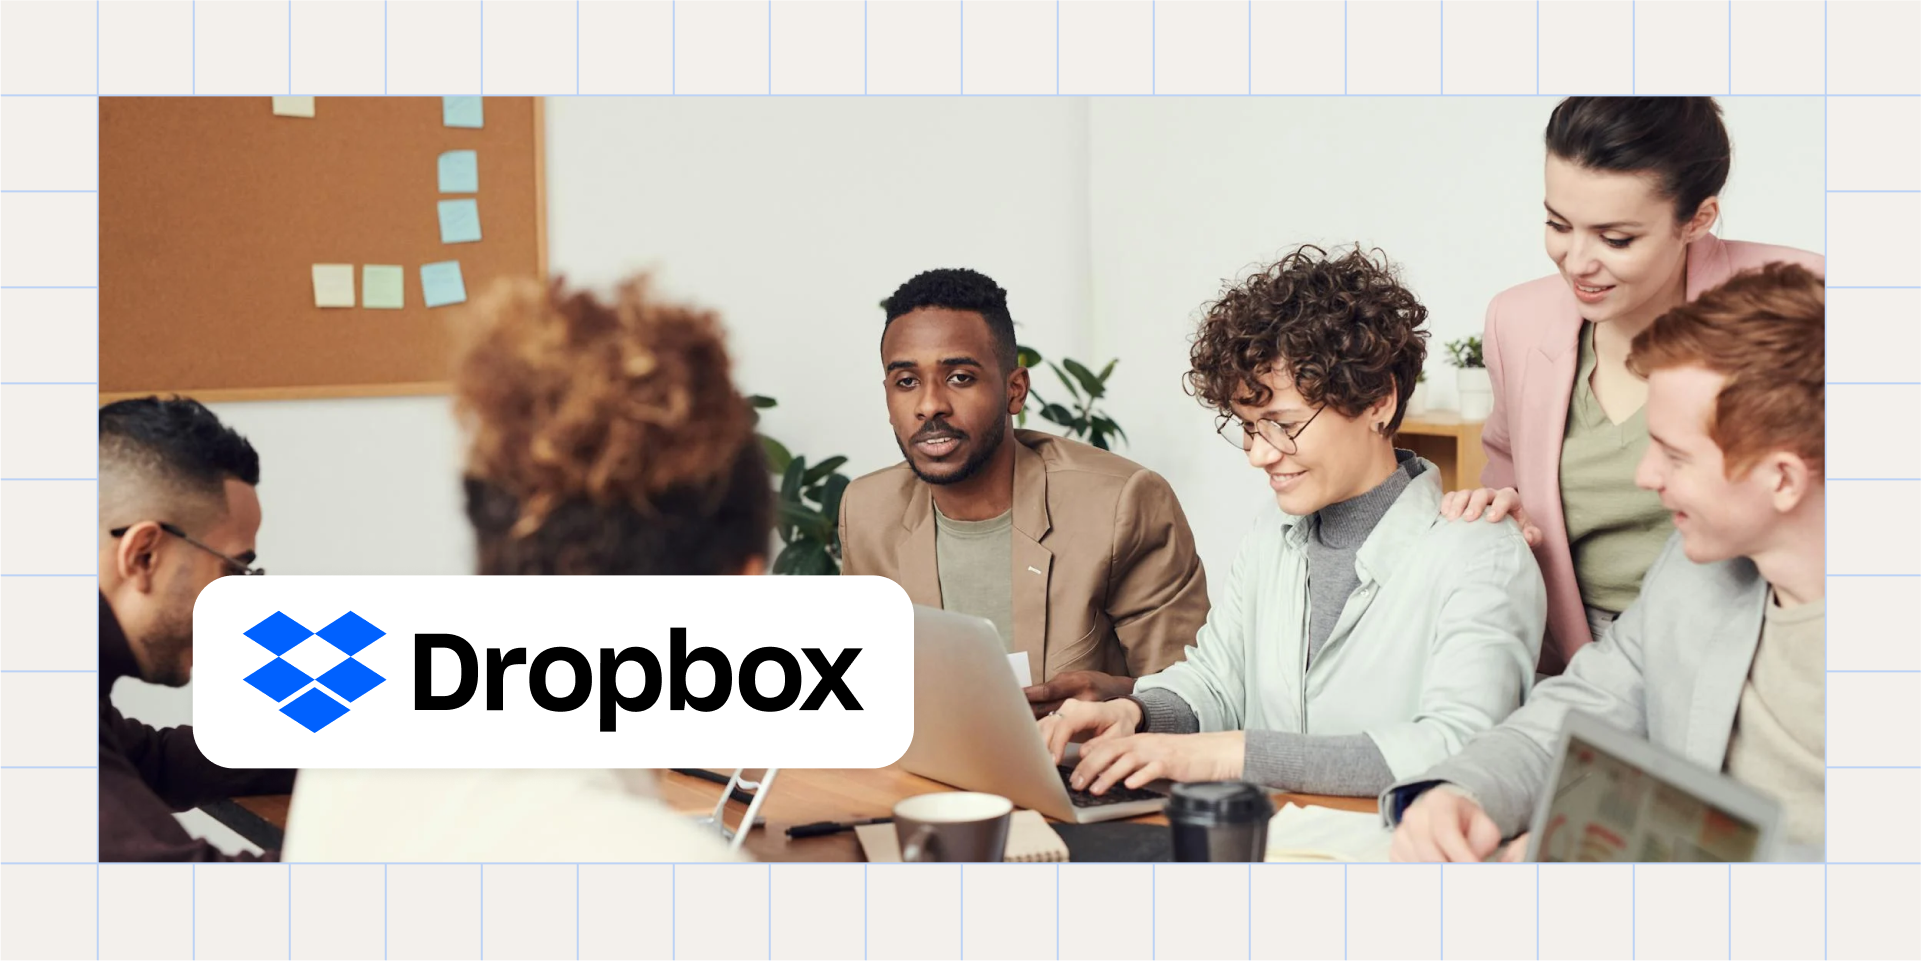 Dropbox discovers insights faster with Fivetran